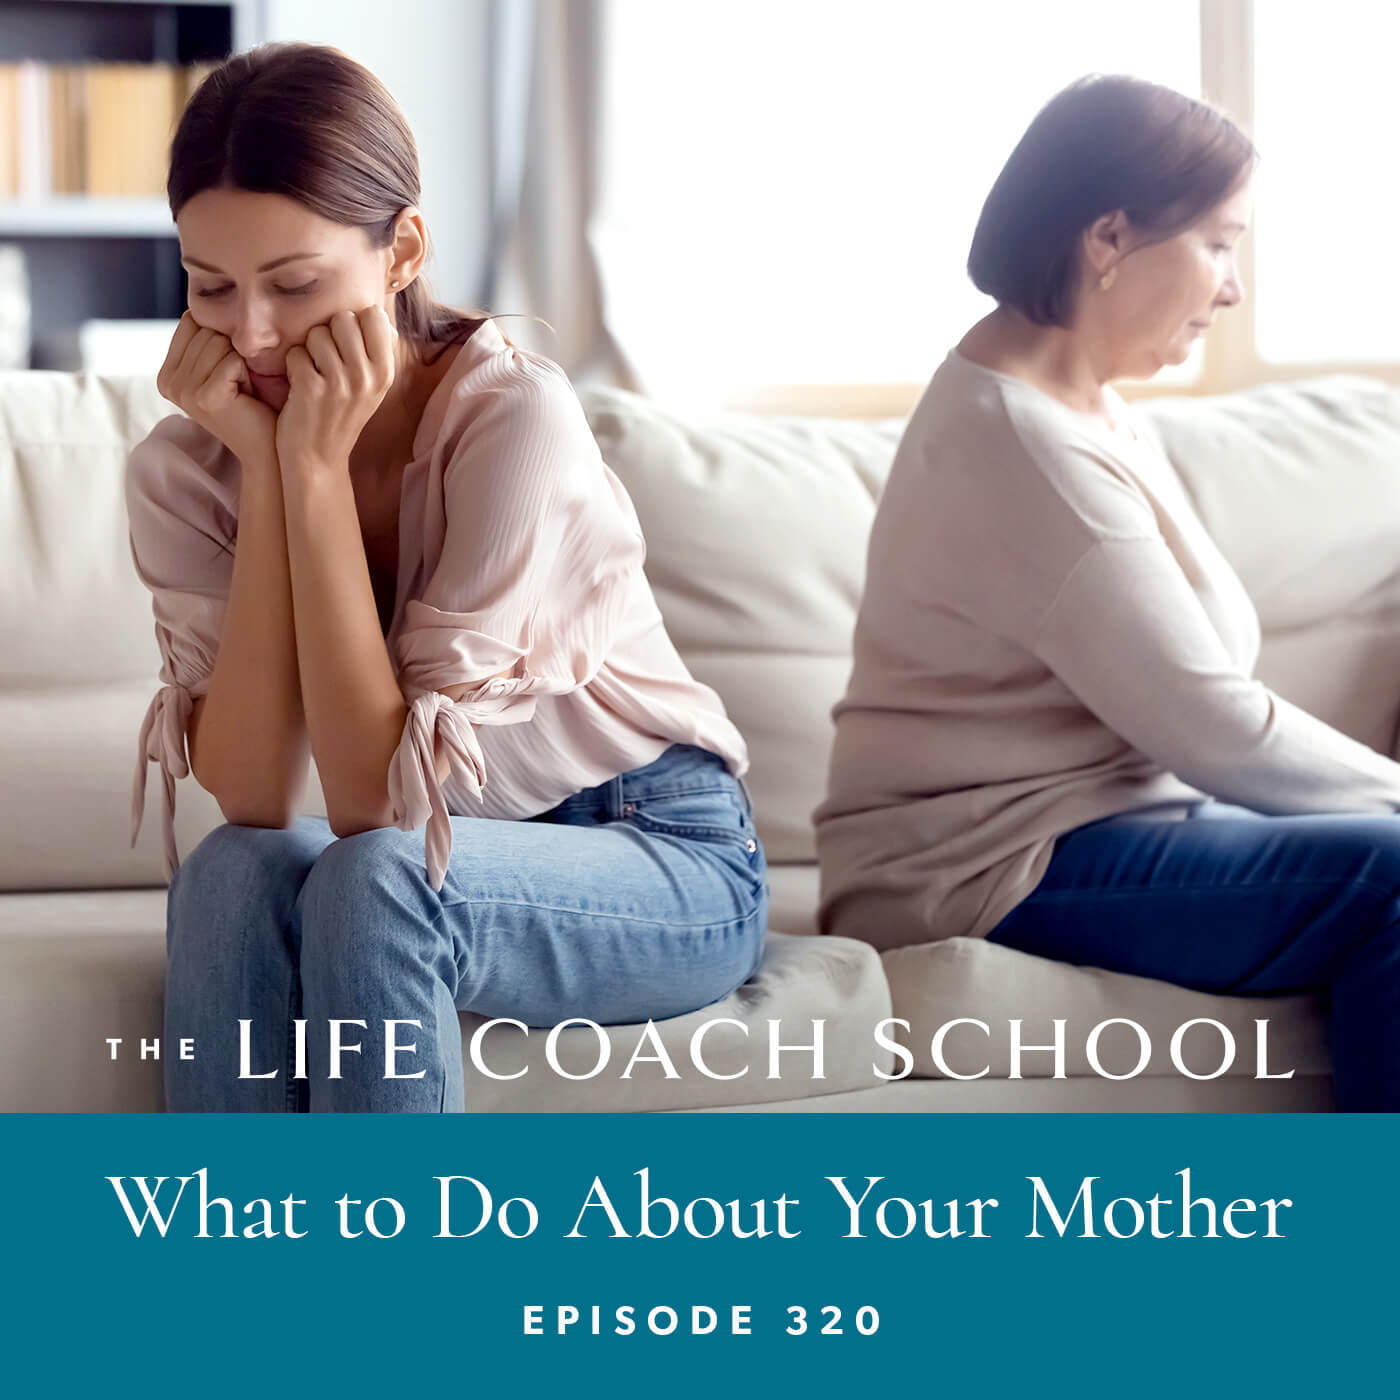 The Life Coach School Podcast with Brooke Castillo | Episode 320 | What to Do About Your Mother